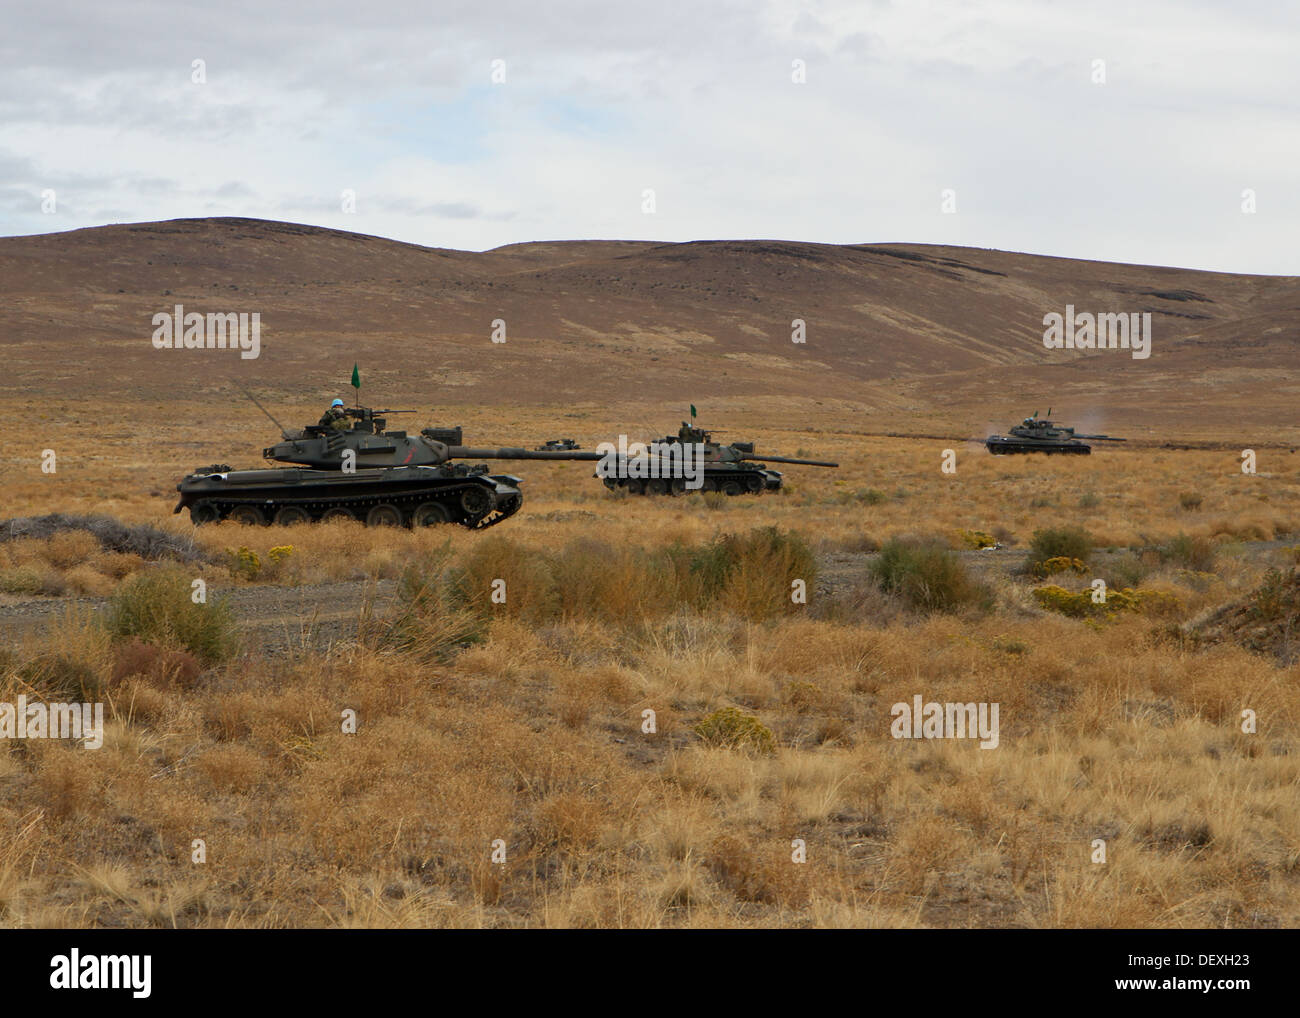 Japan Ground Self-Defense Force soldiers form a line with tanks after completing their part of a joint U.S. and Japanese live-fire exercise during exercise Rising Thunder 2013 at Yakima Training Center, Wash., Sept. 17, 2013. Rising Thunder is a U.S. Army Stock Photo